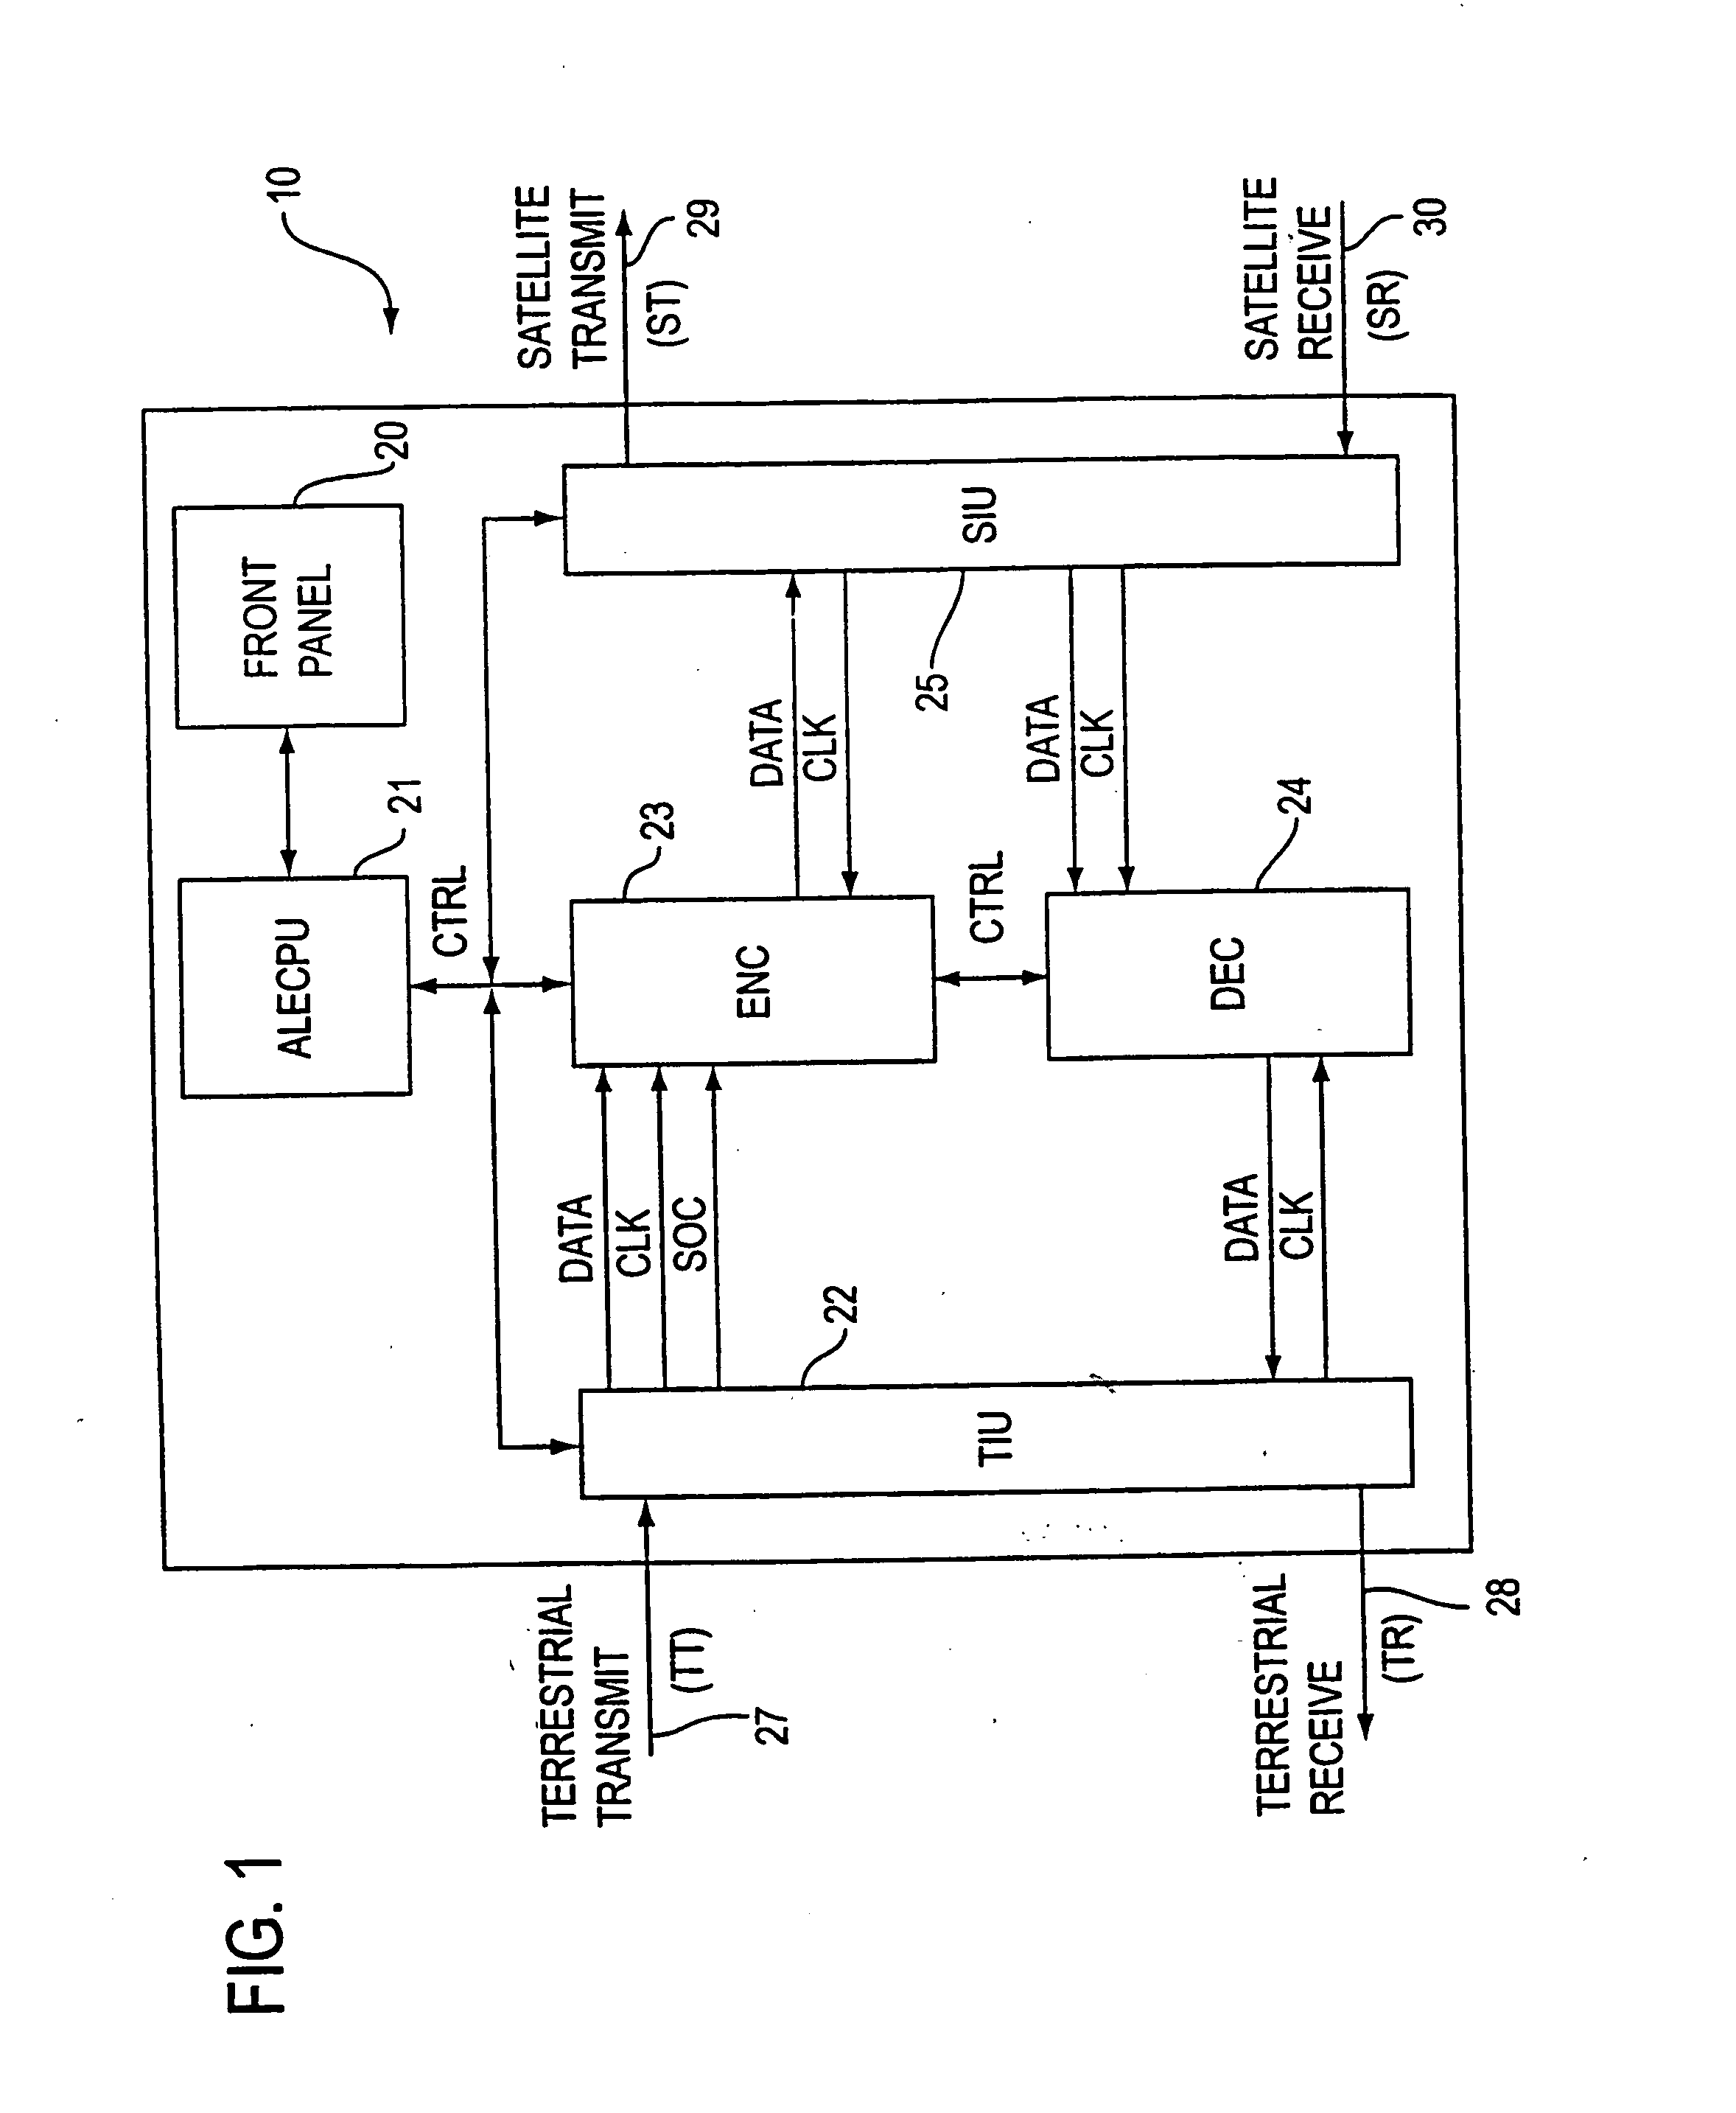 Method and apparatus for improving asynchronous transfer mode operation over noisy, high speed wireless links